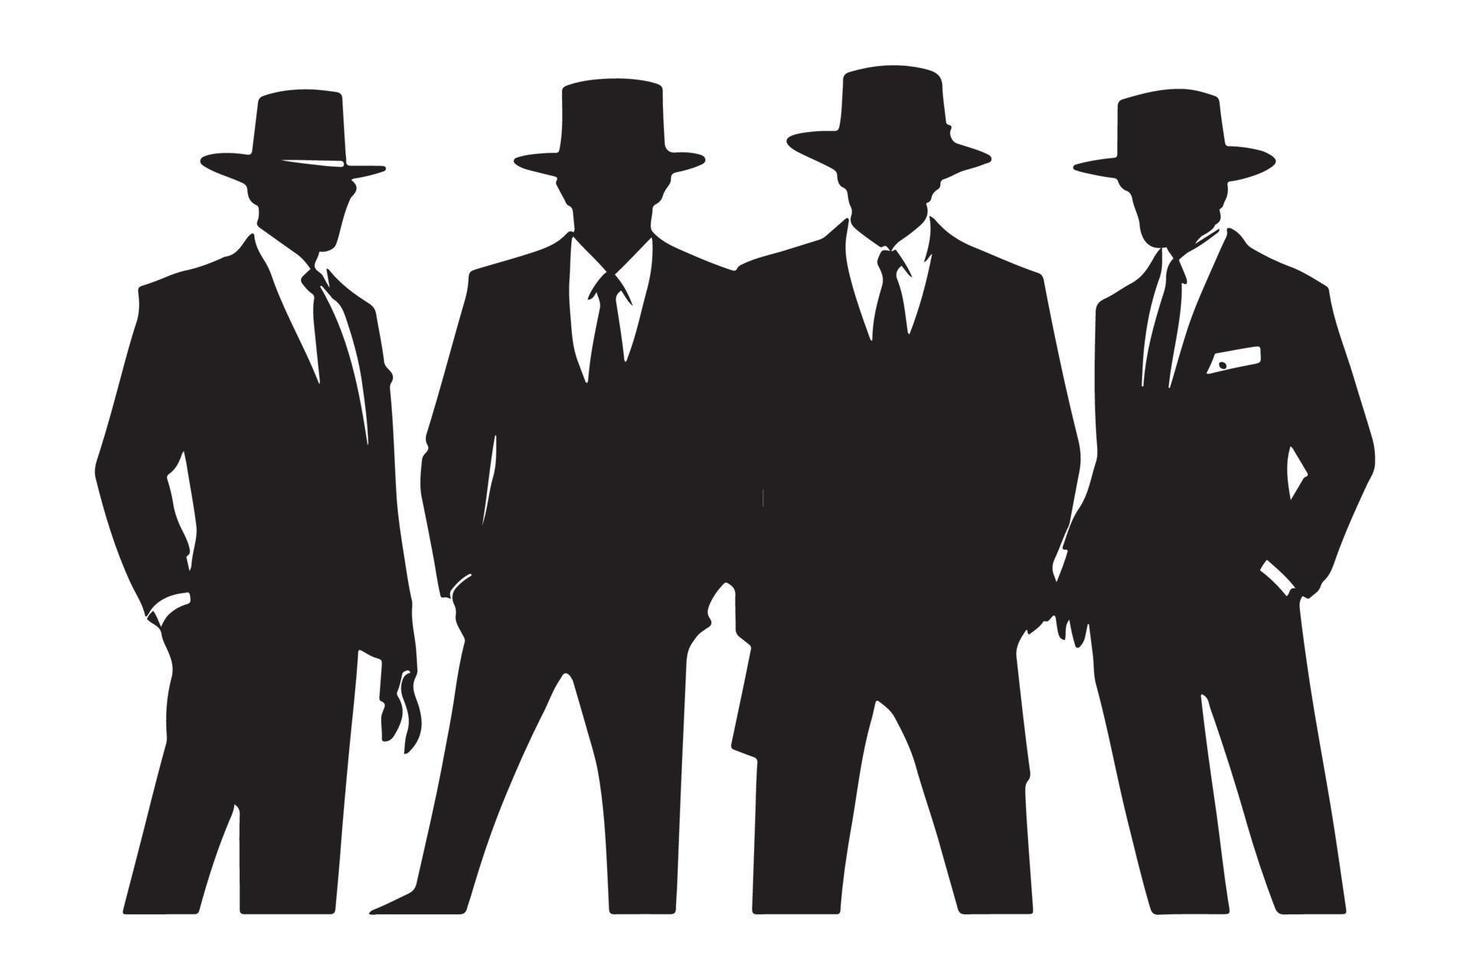 Mafia silhouette vector, Detective silhouette vector isolated on white background